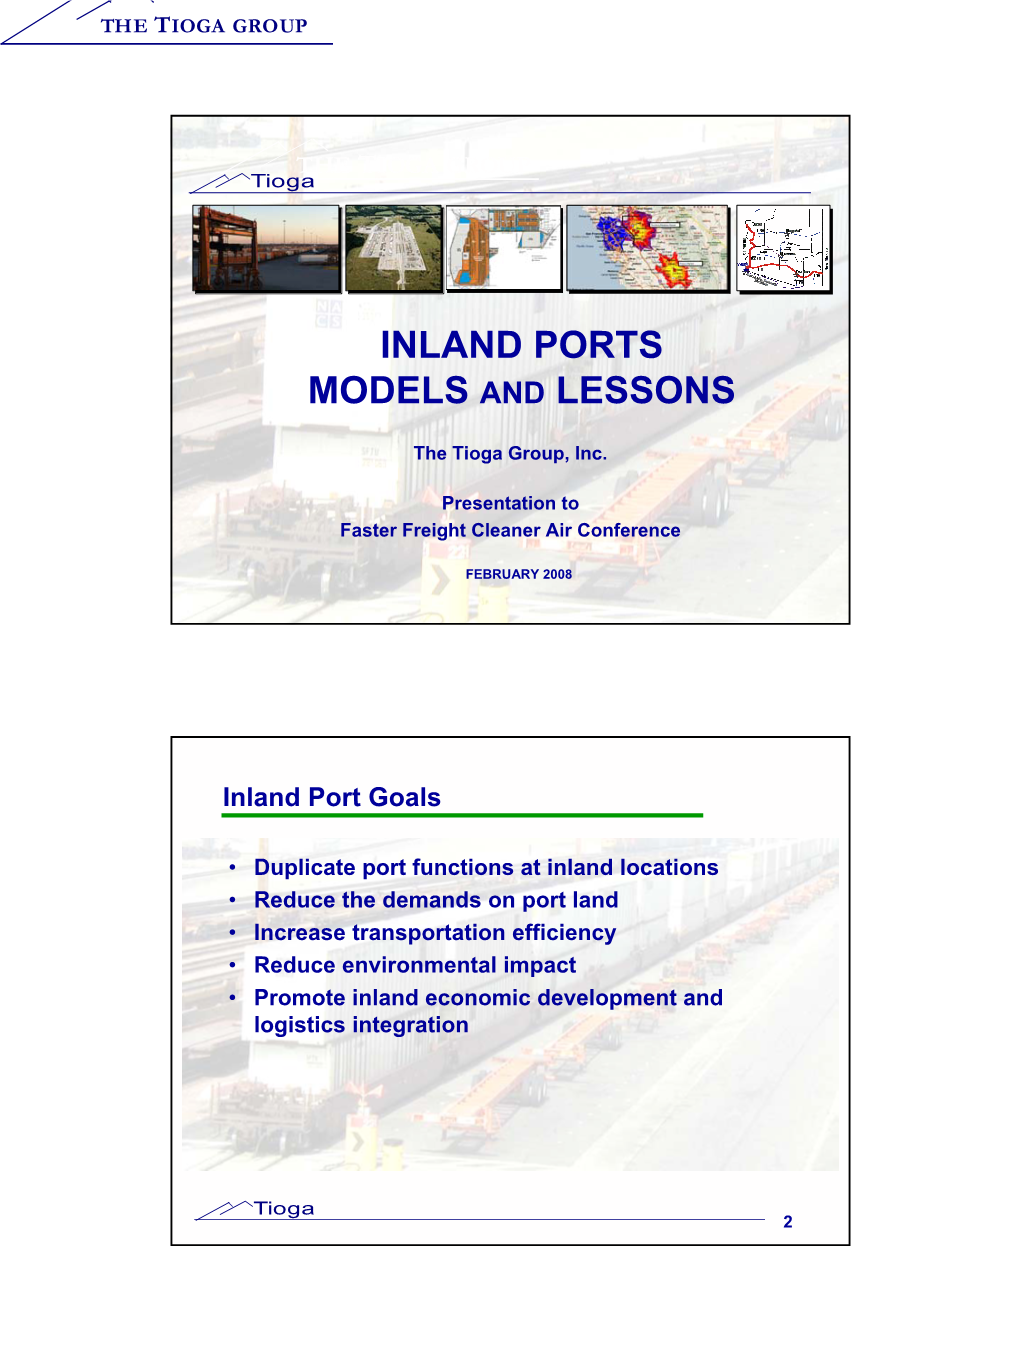 Inland Ports Models and Lessons